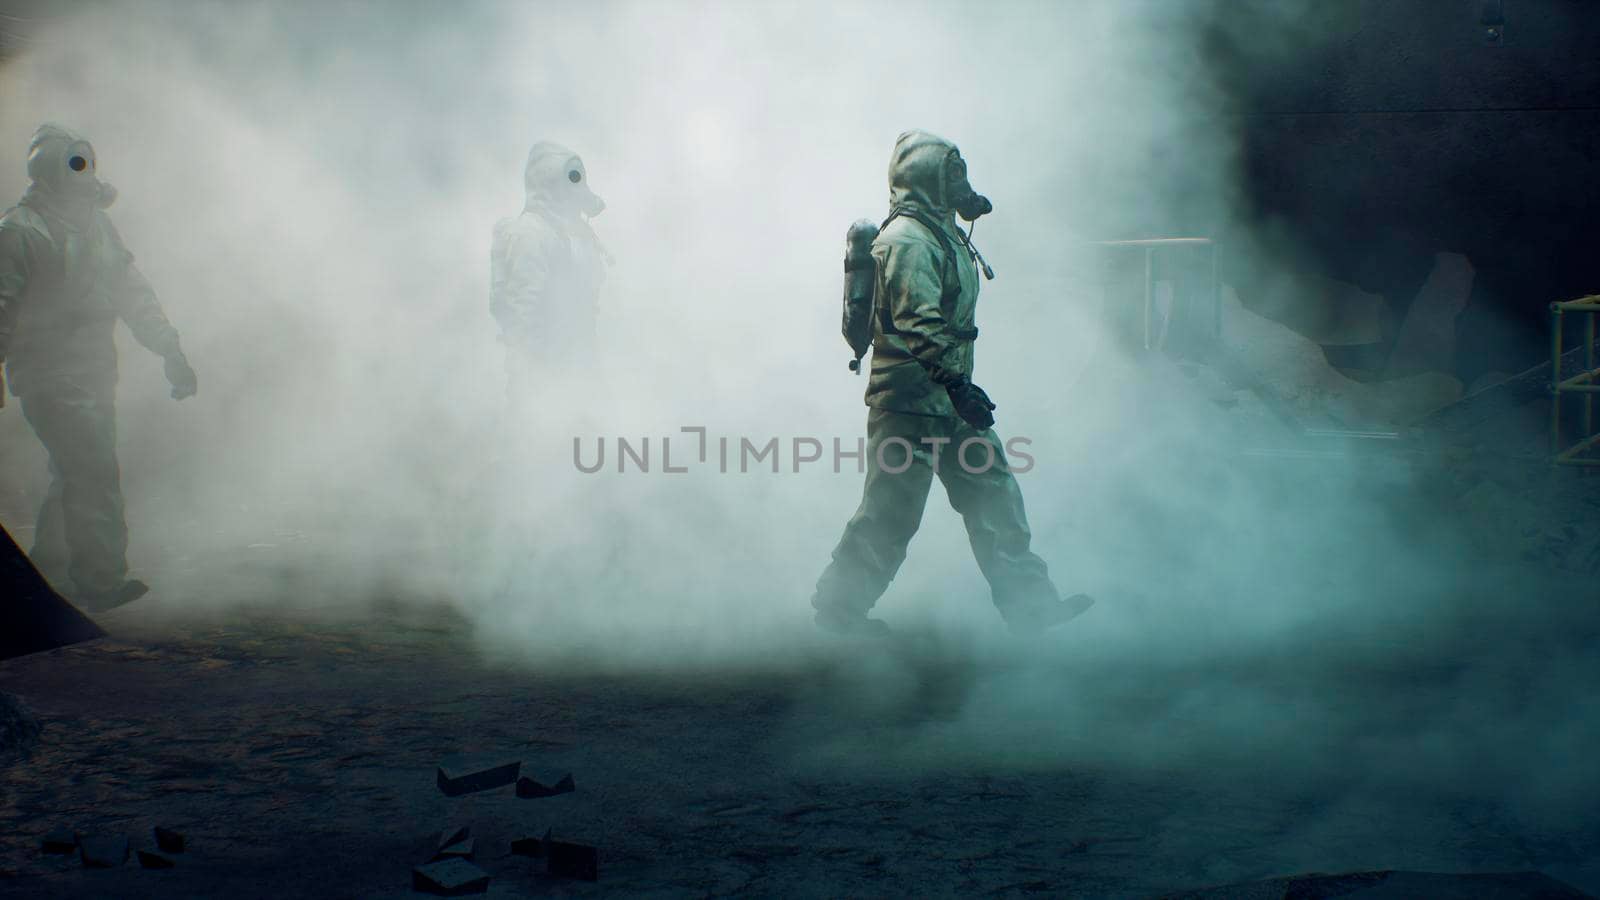 Stalkers in military protective clothing and a gas mask walk through the smoke along a deserted tunnel. The concept of a post-apocalyptic world after a nuclear war.